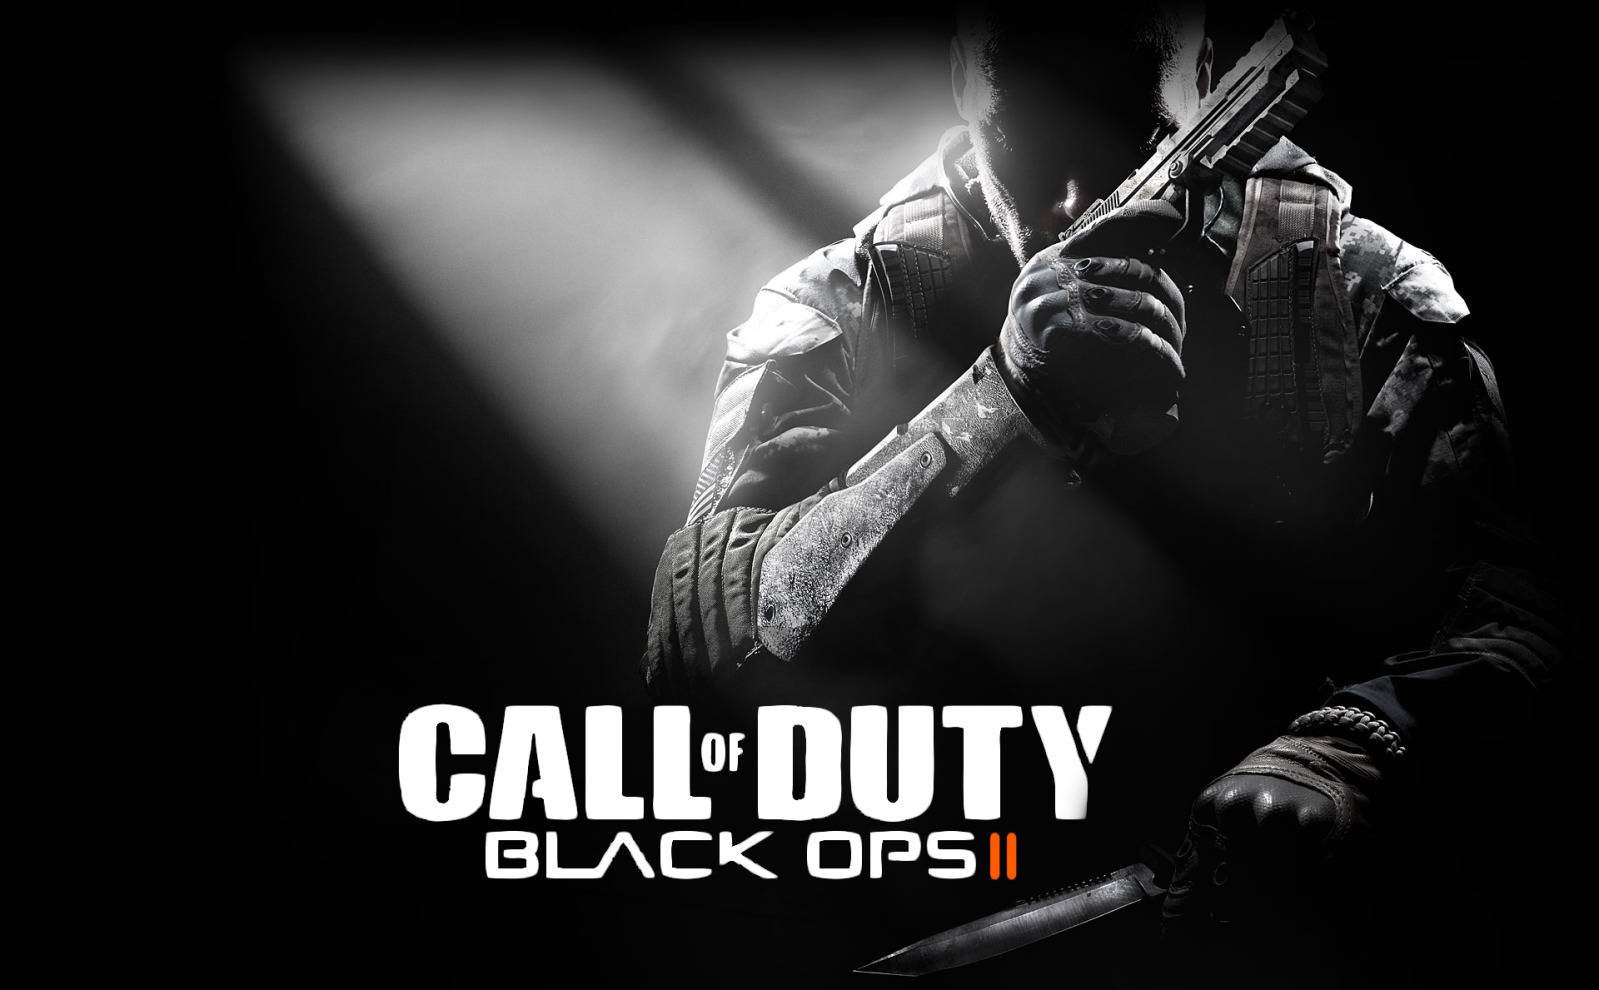 Call Of Duty Black Ops 2 Xbox 360 HD Wallpaper, Background Image